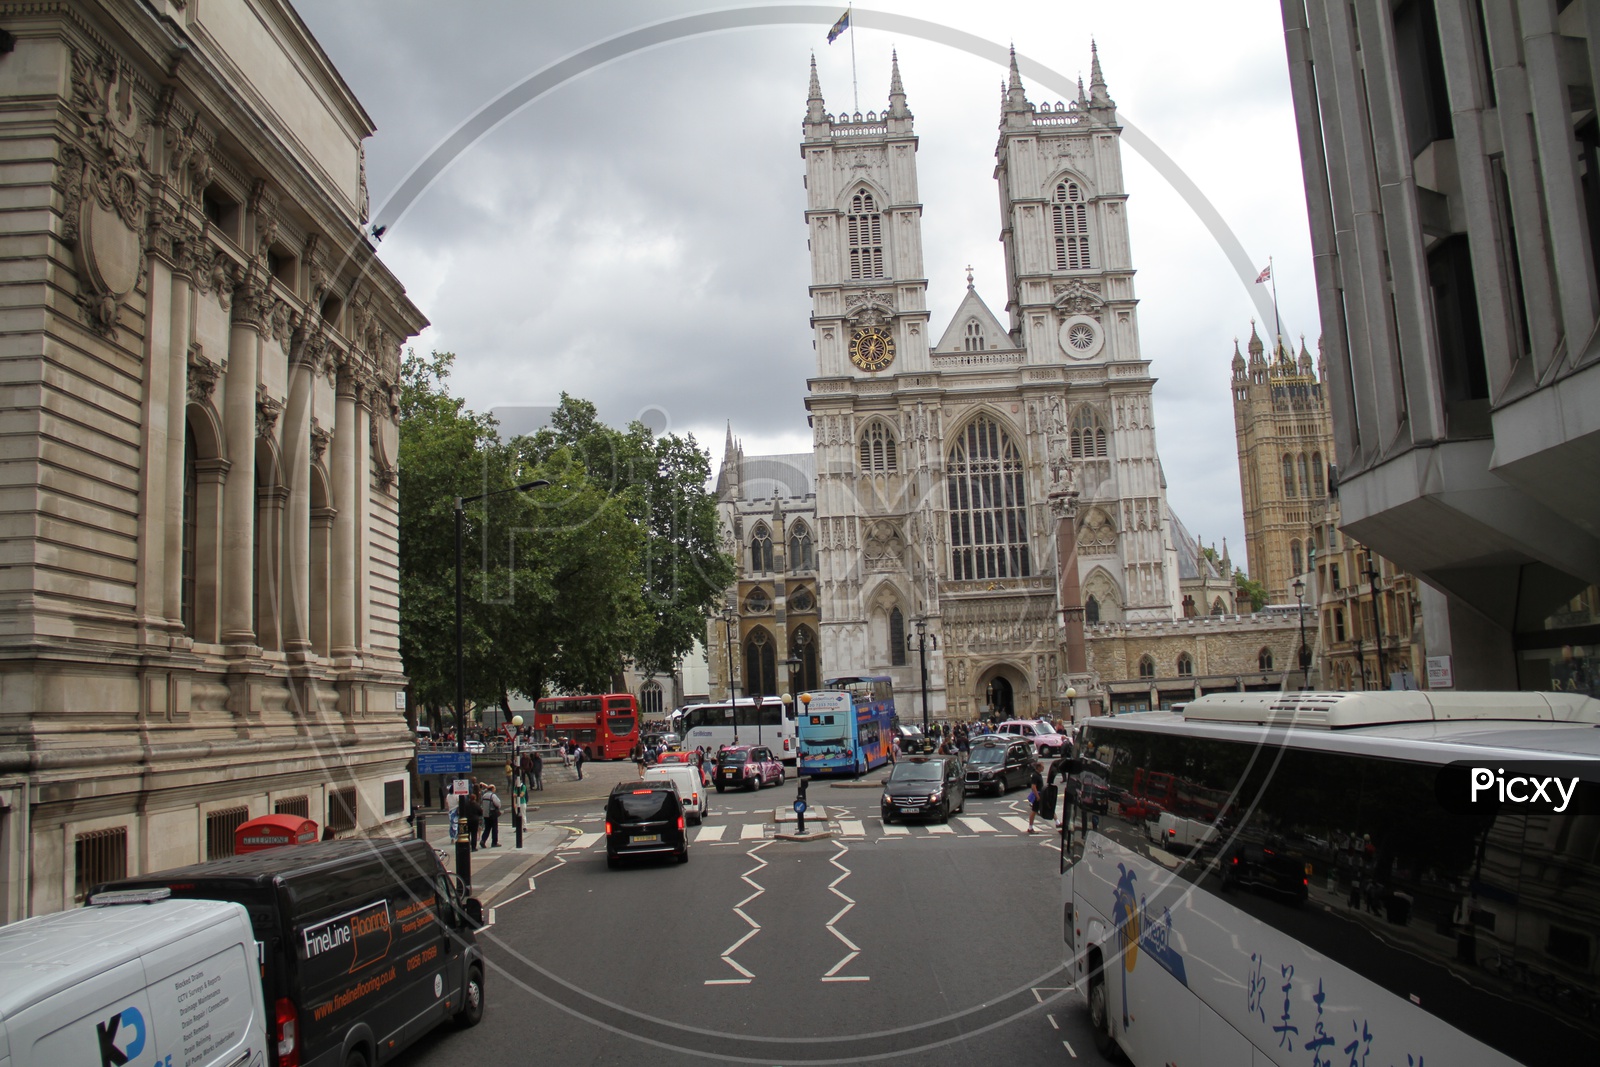 View of Westminster Abbey or Collegiate Church  from a Bus